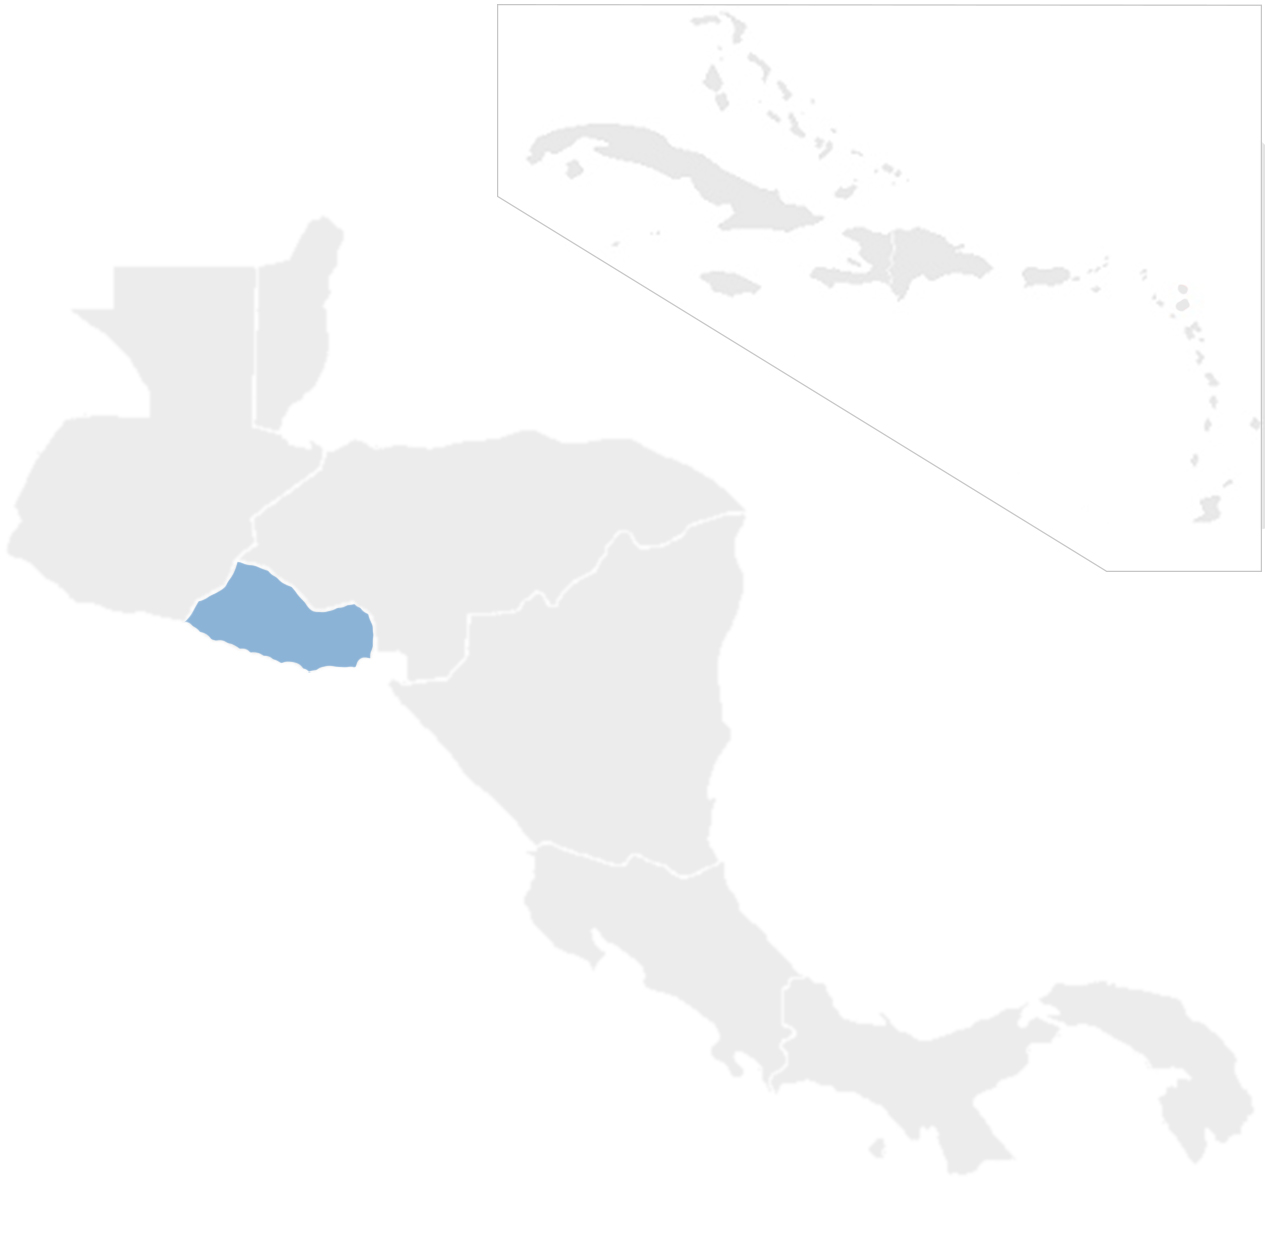 Gray map of Central America and the Caribbean with El Salvador in blue